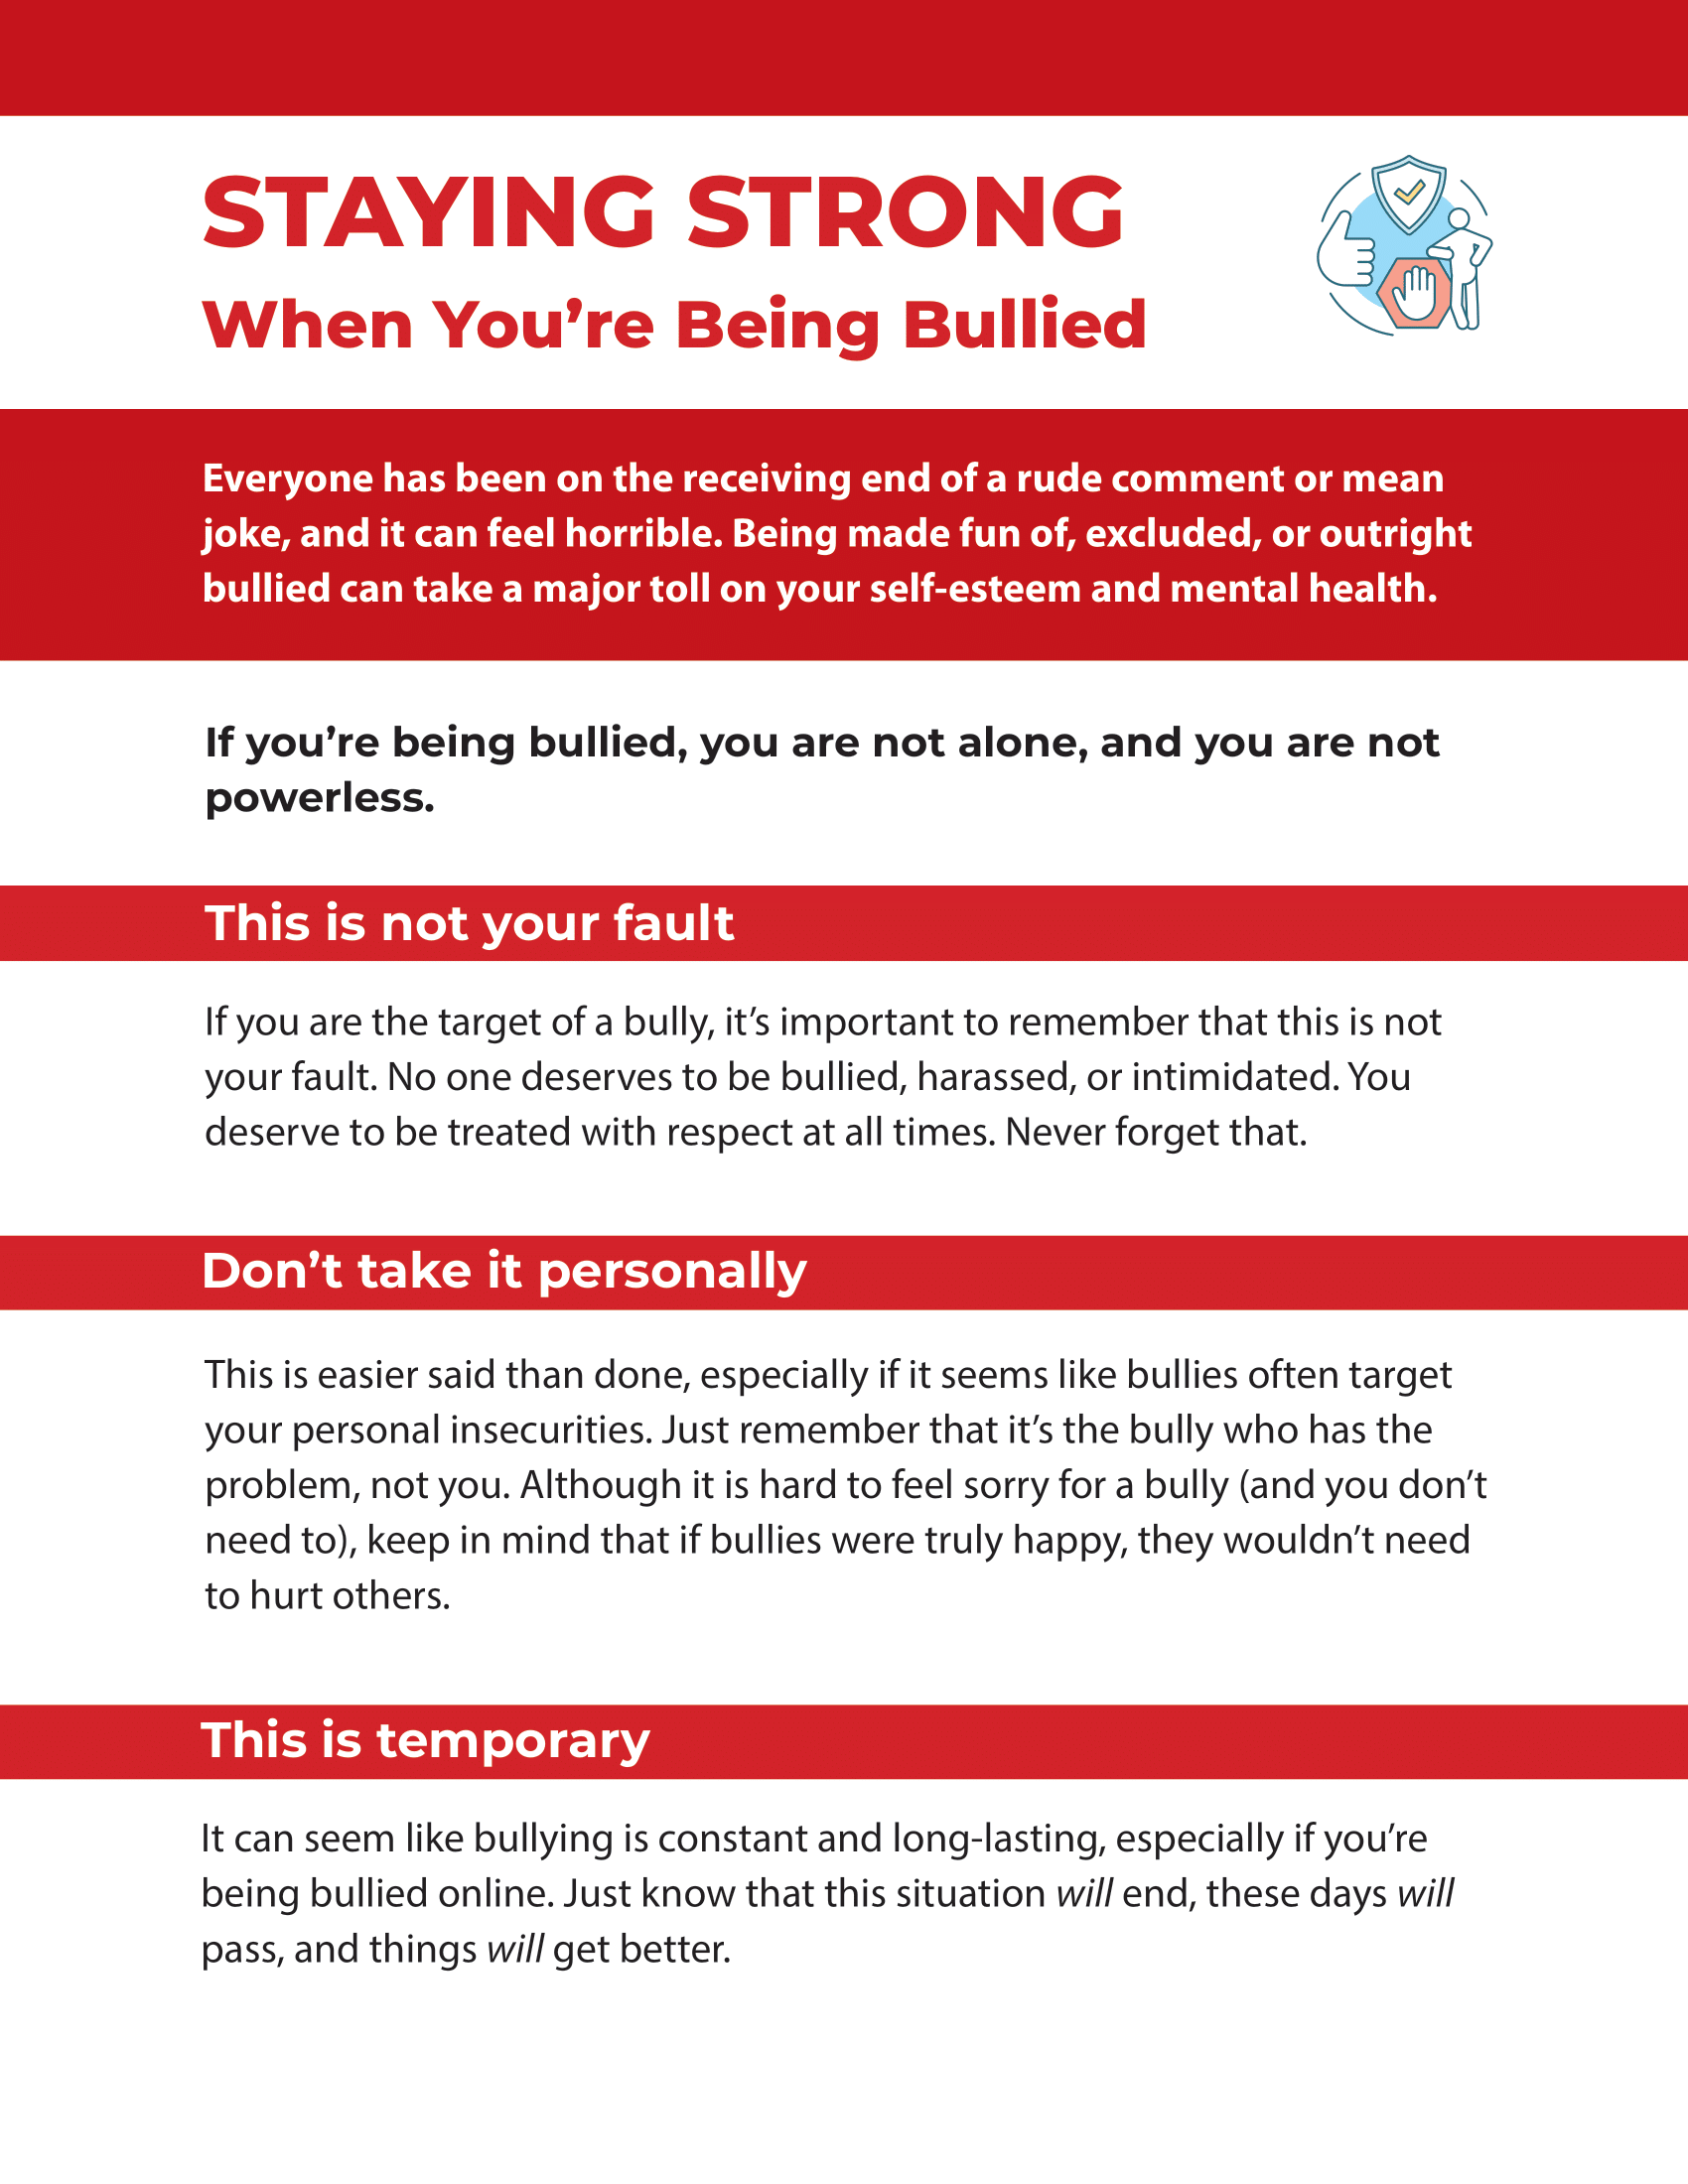 Staying Strong When You're Being Bullied